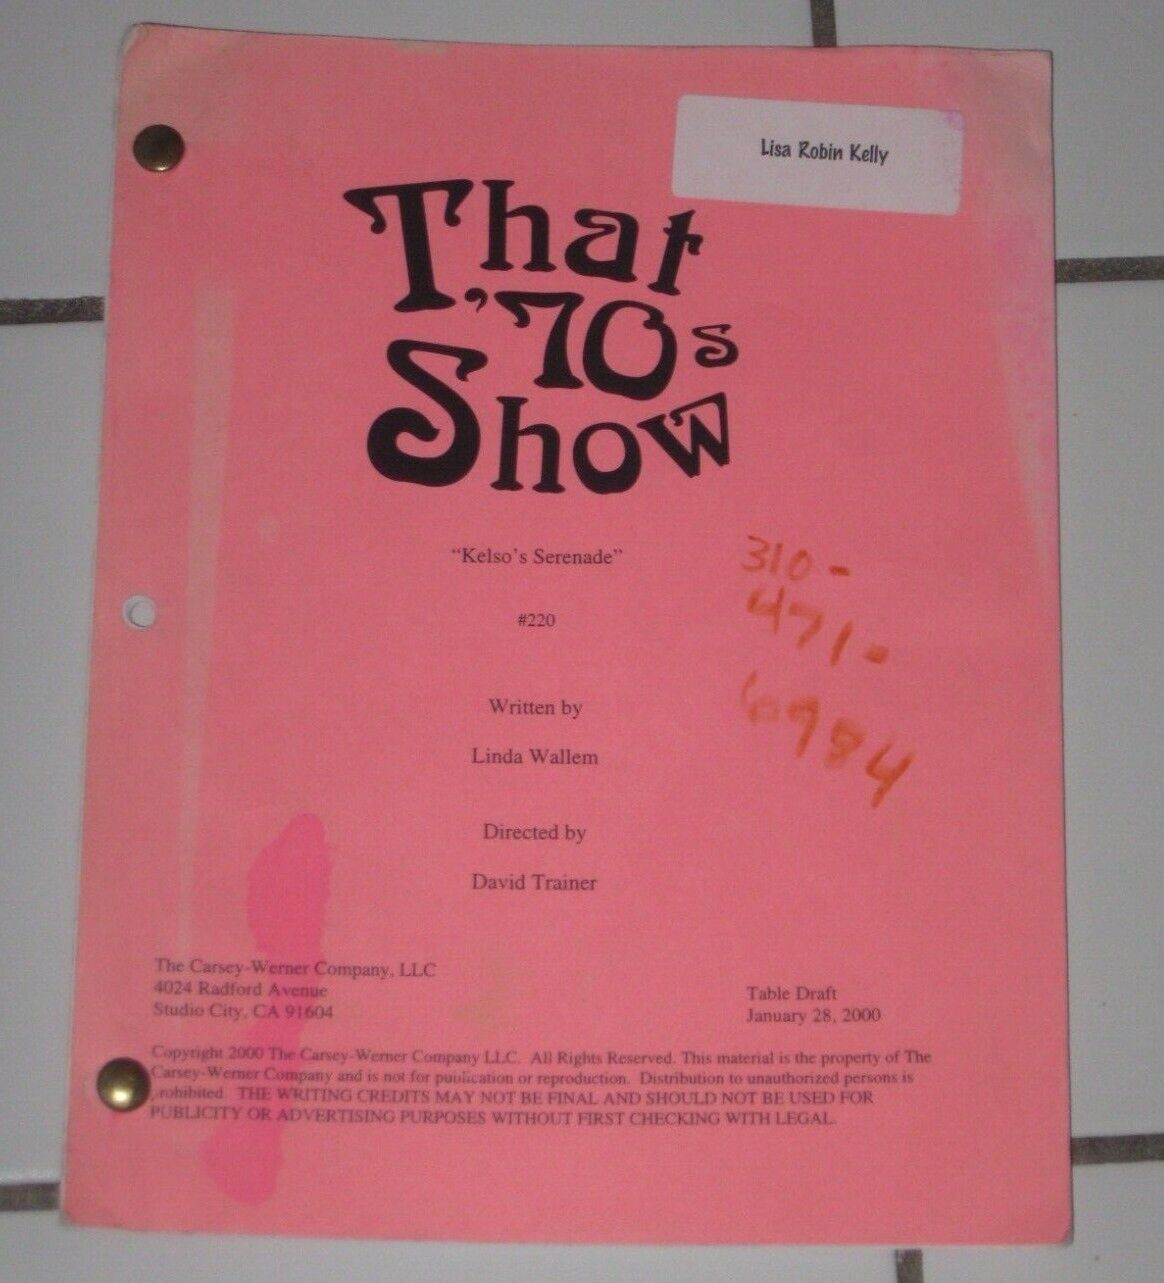 "that 70s Show" Original Table Draft Production Script For "kelso's Serenade"